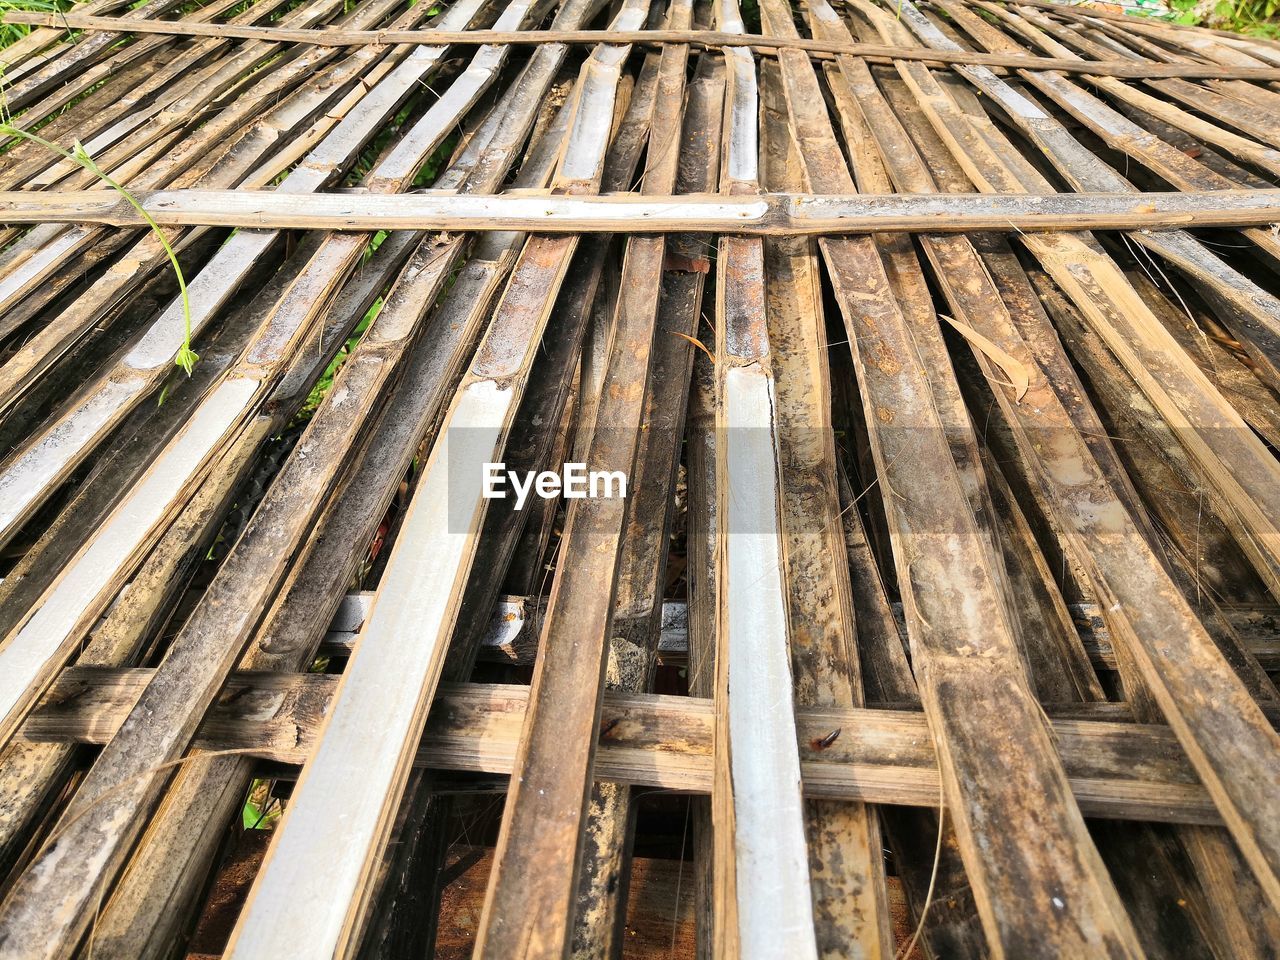 HIGH ANGLE VIEW OF BAMBOO ROOF